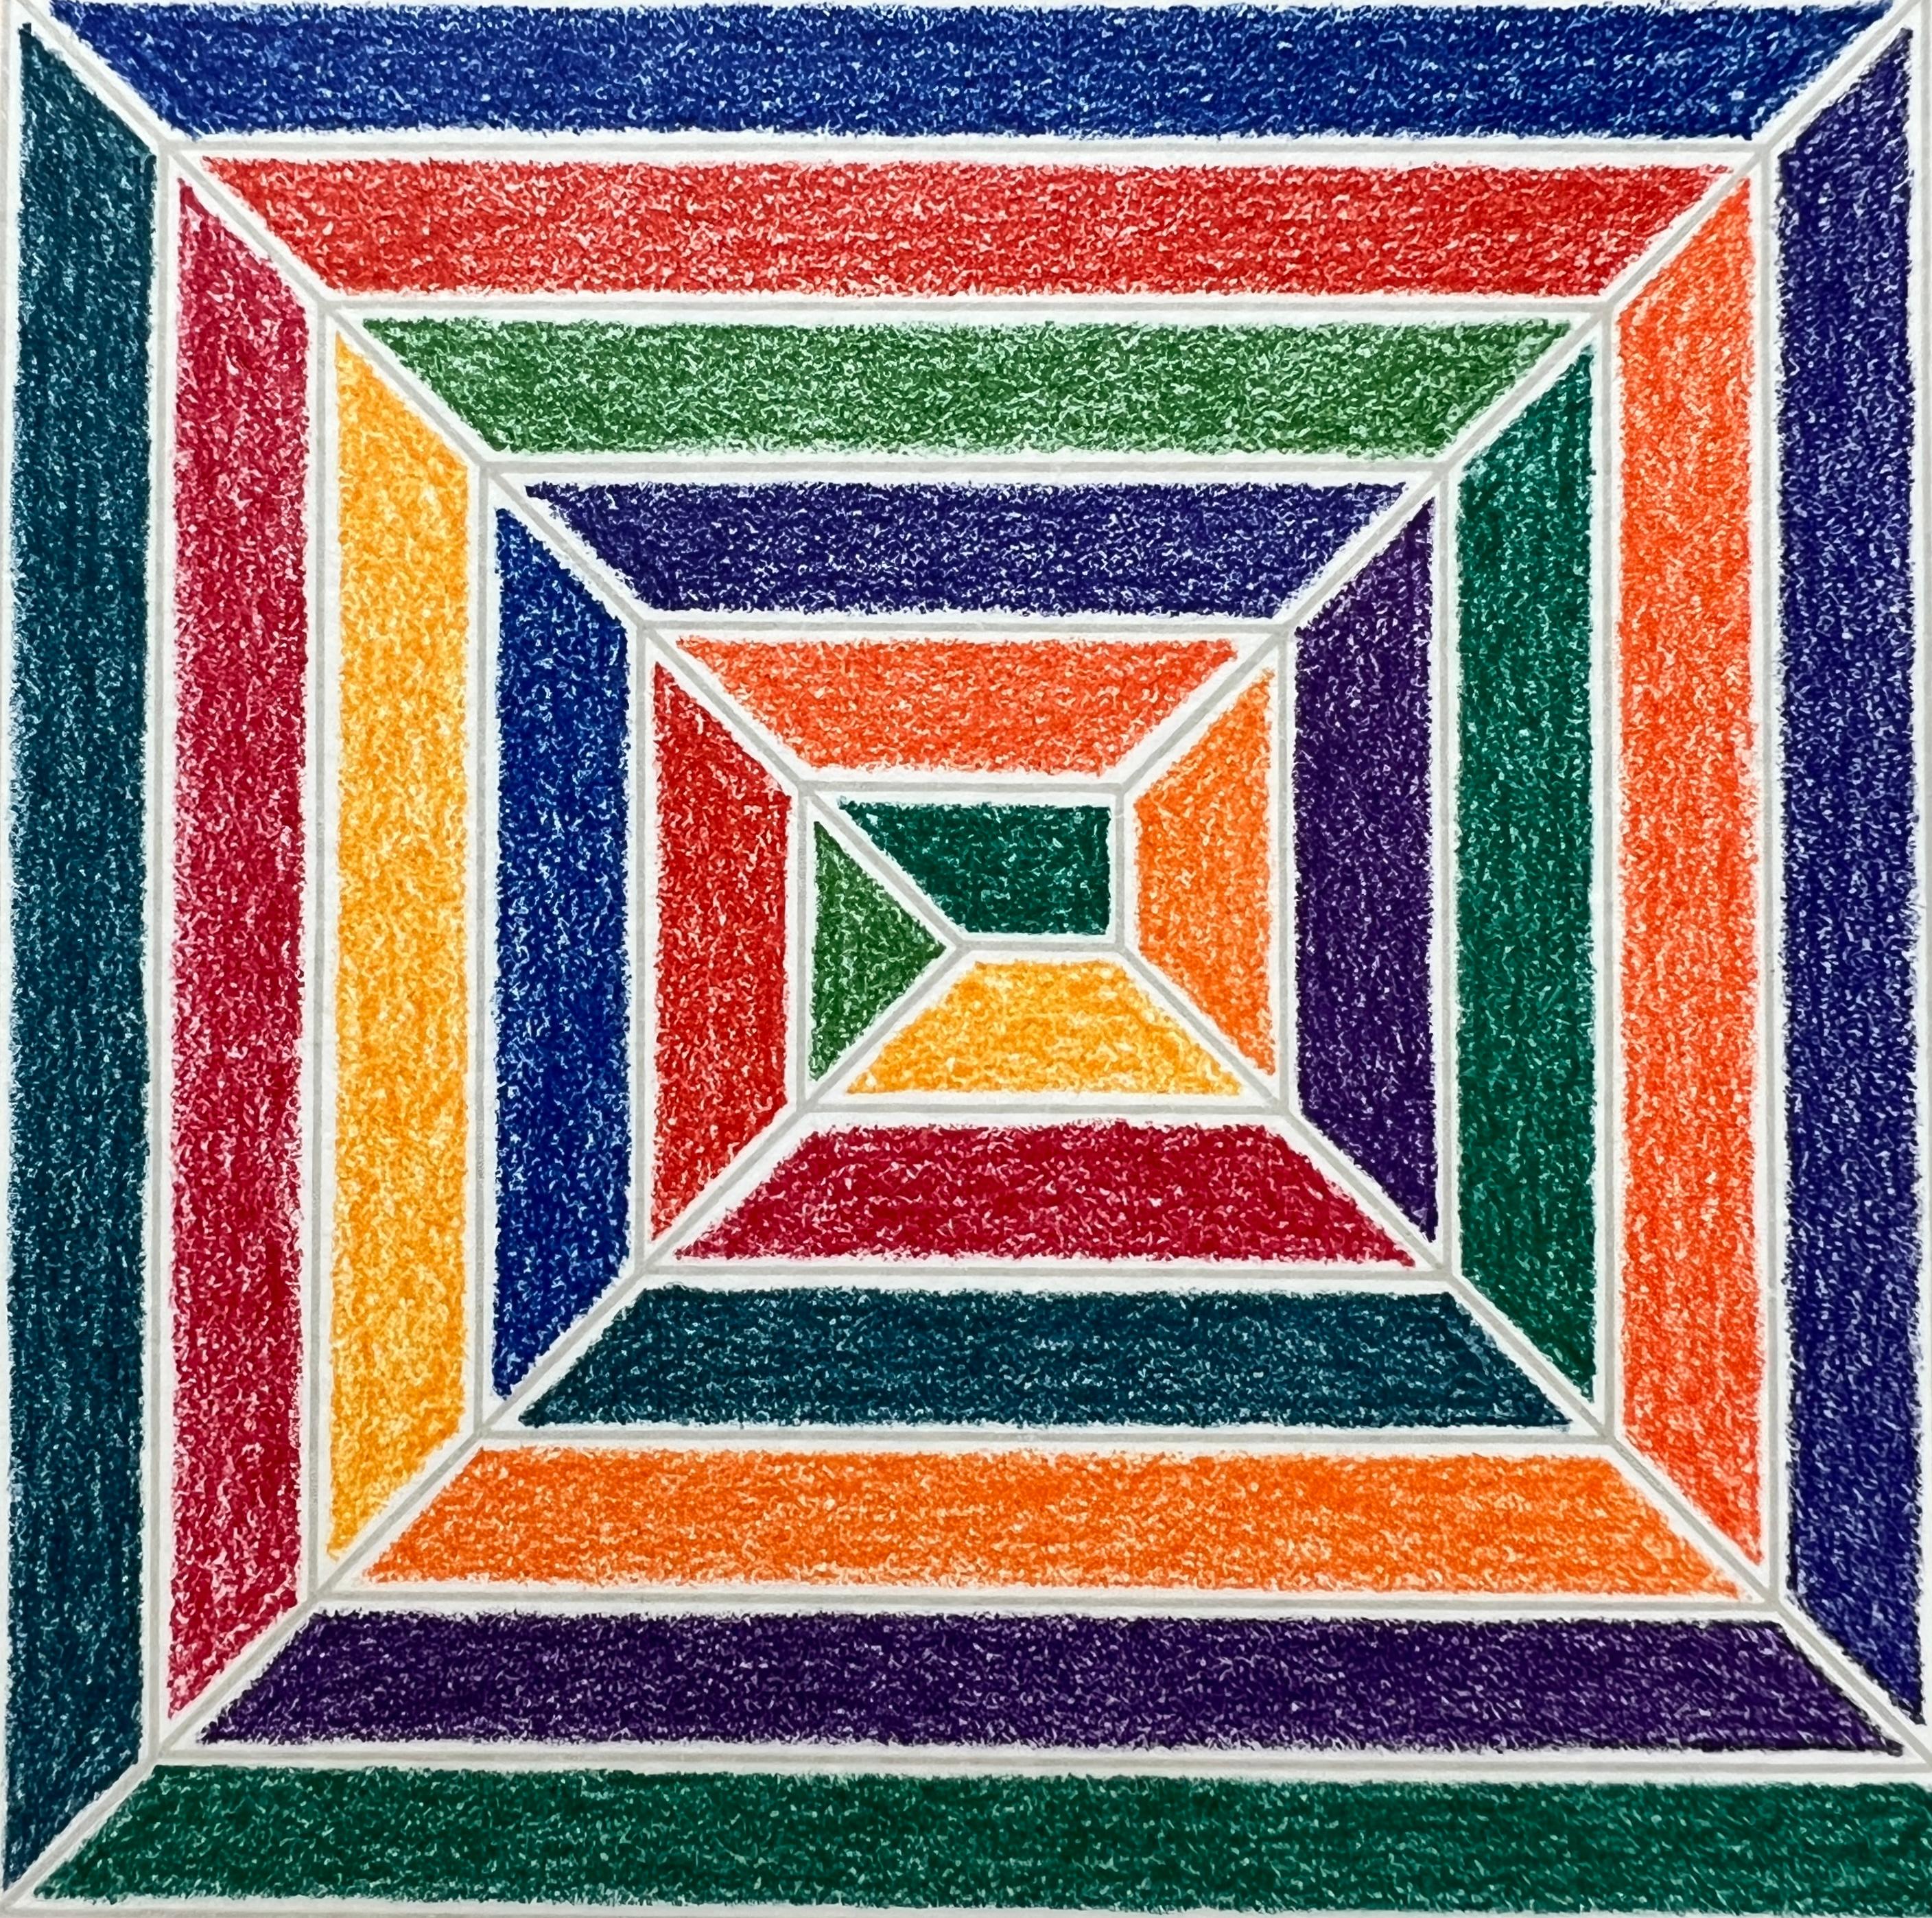 Frank Stella ( 1936 ) – hand-signed Offset lithograph in colours - 1973 1